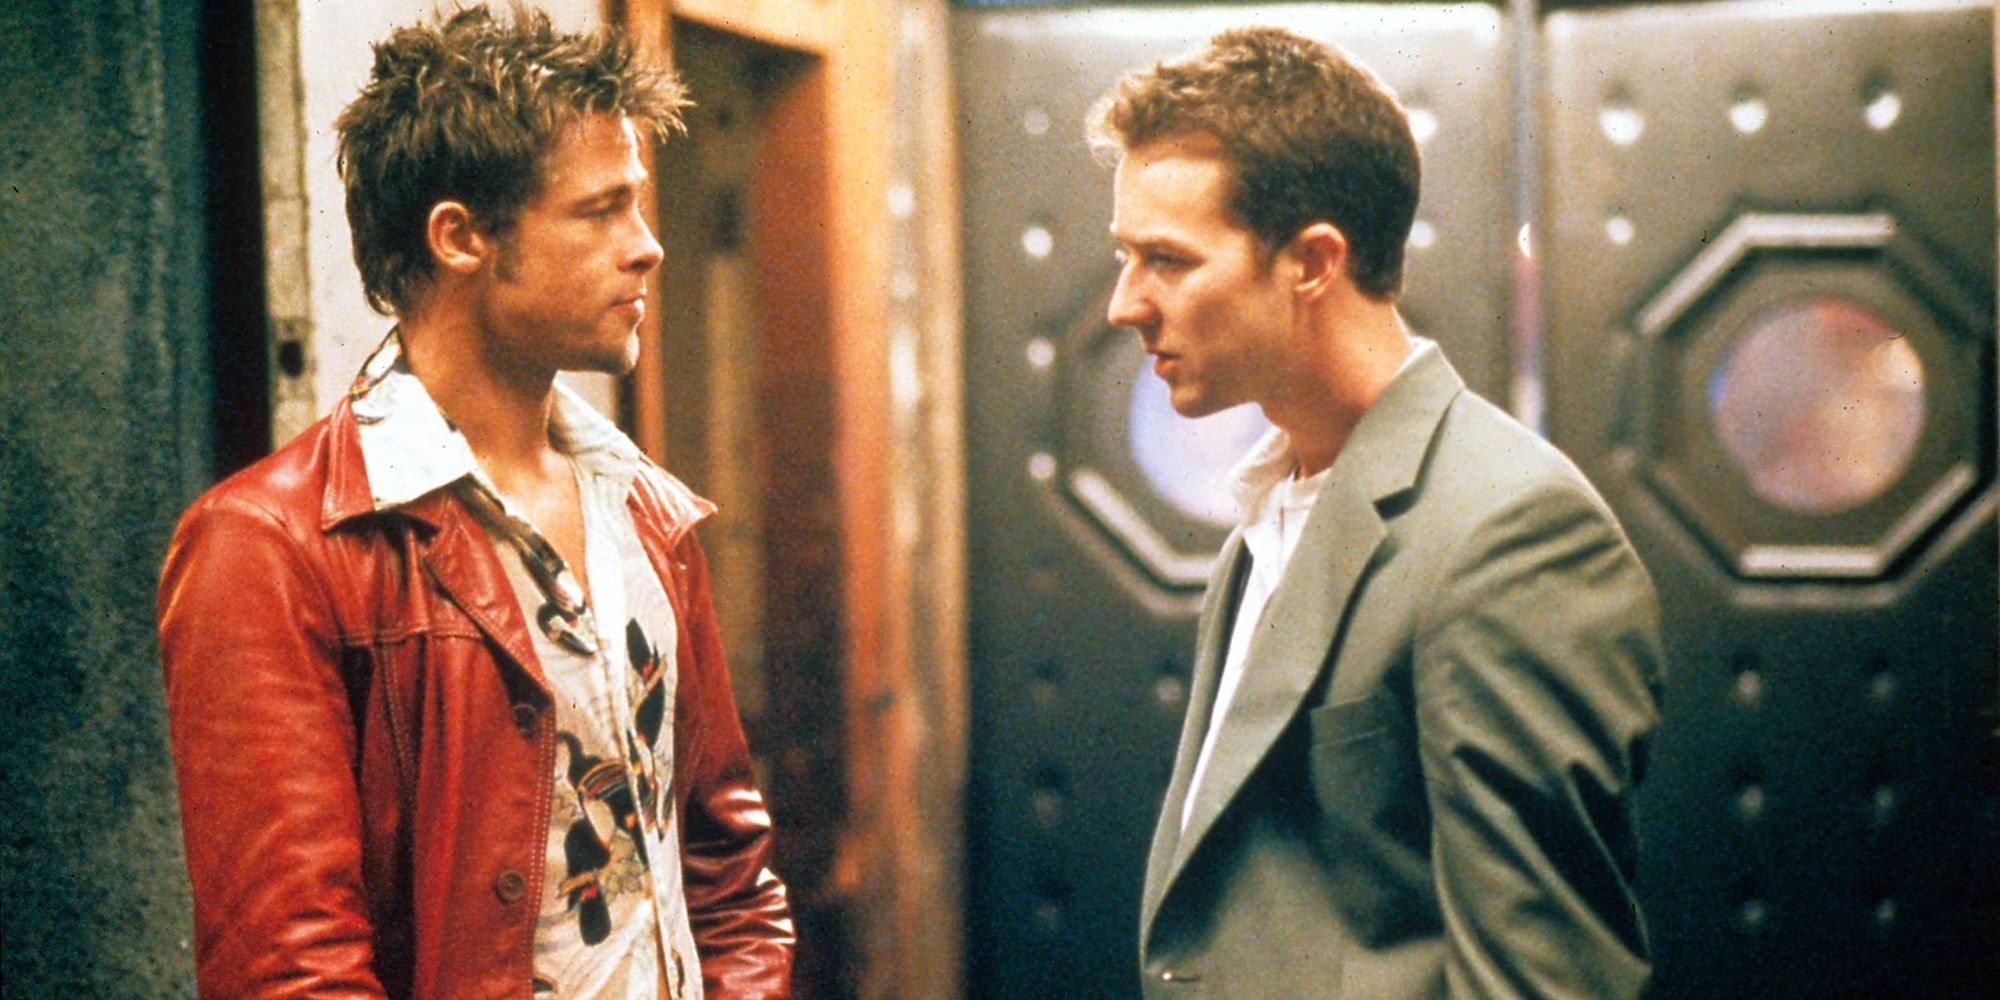 Edward Norton as The Narrator and Brad Pitt as Tyler Durden in 'Fight Club'